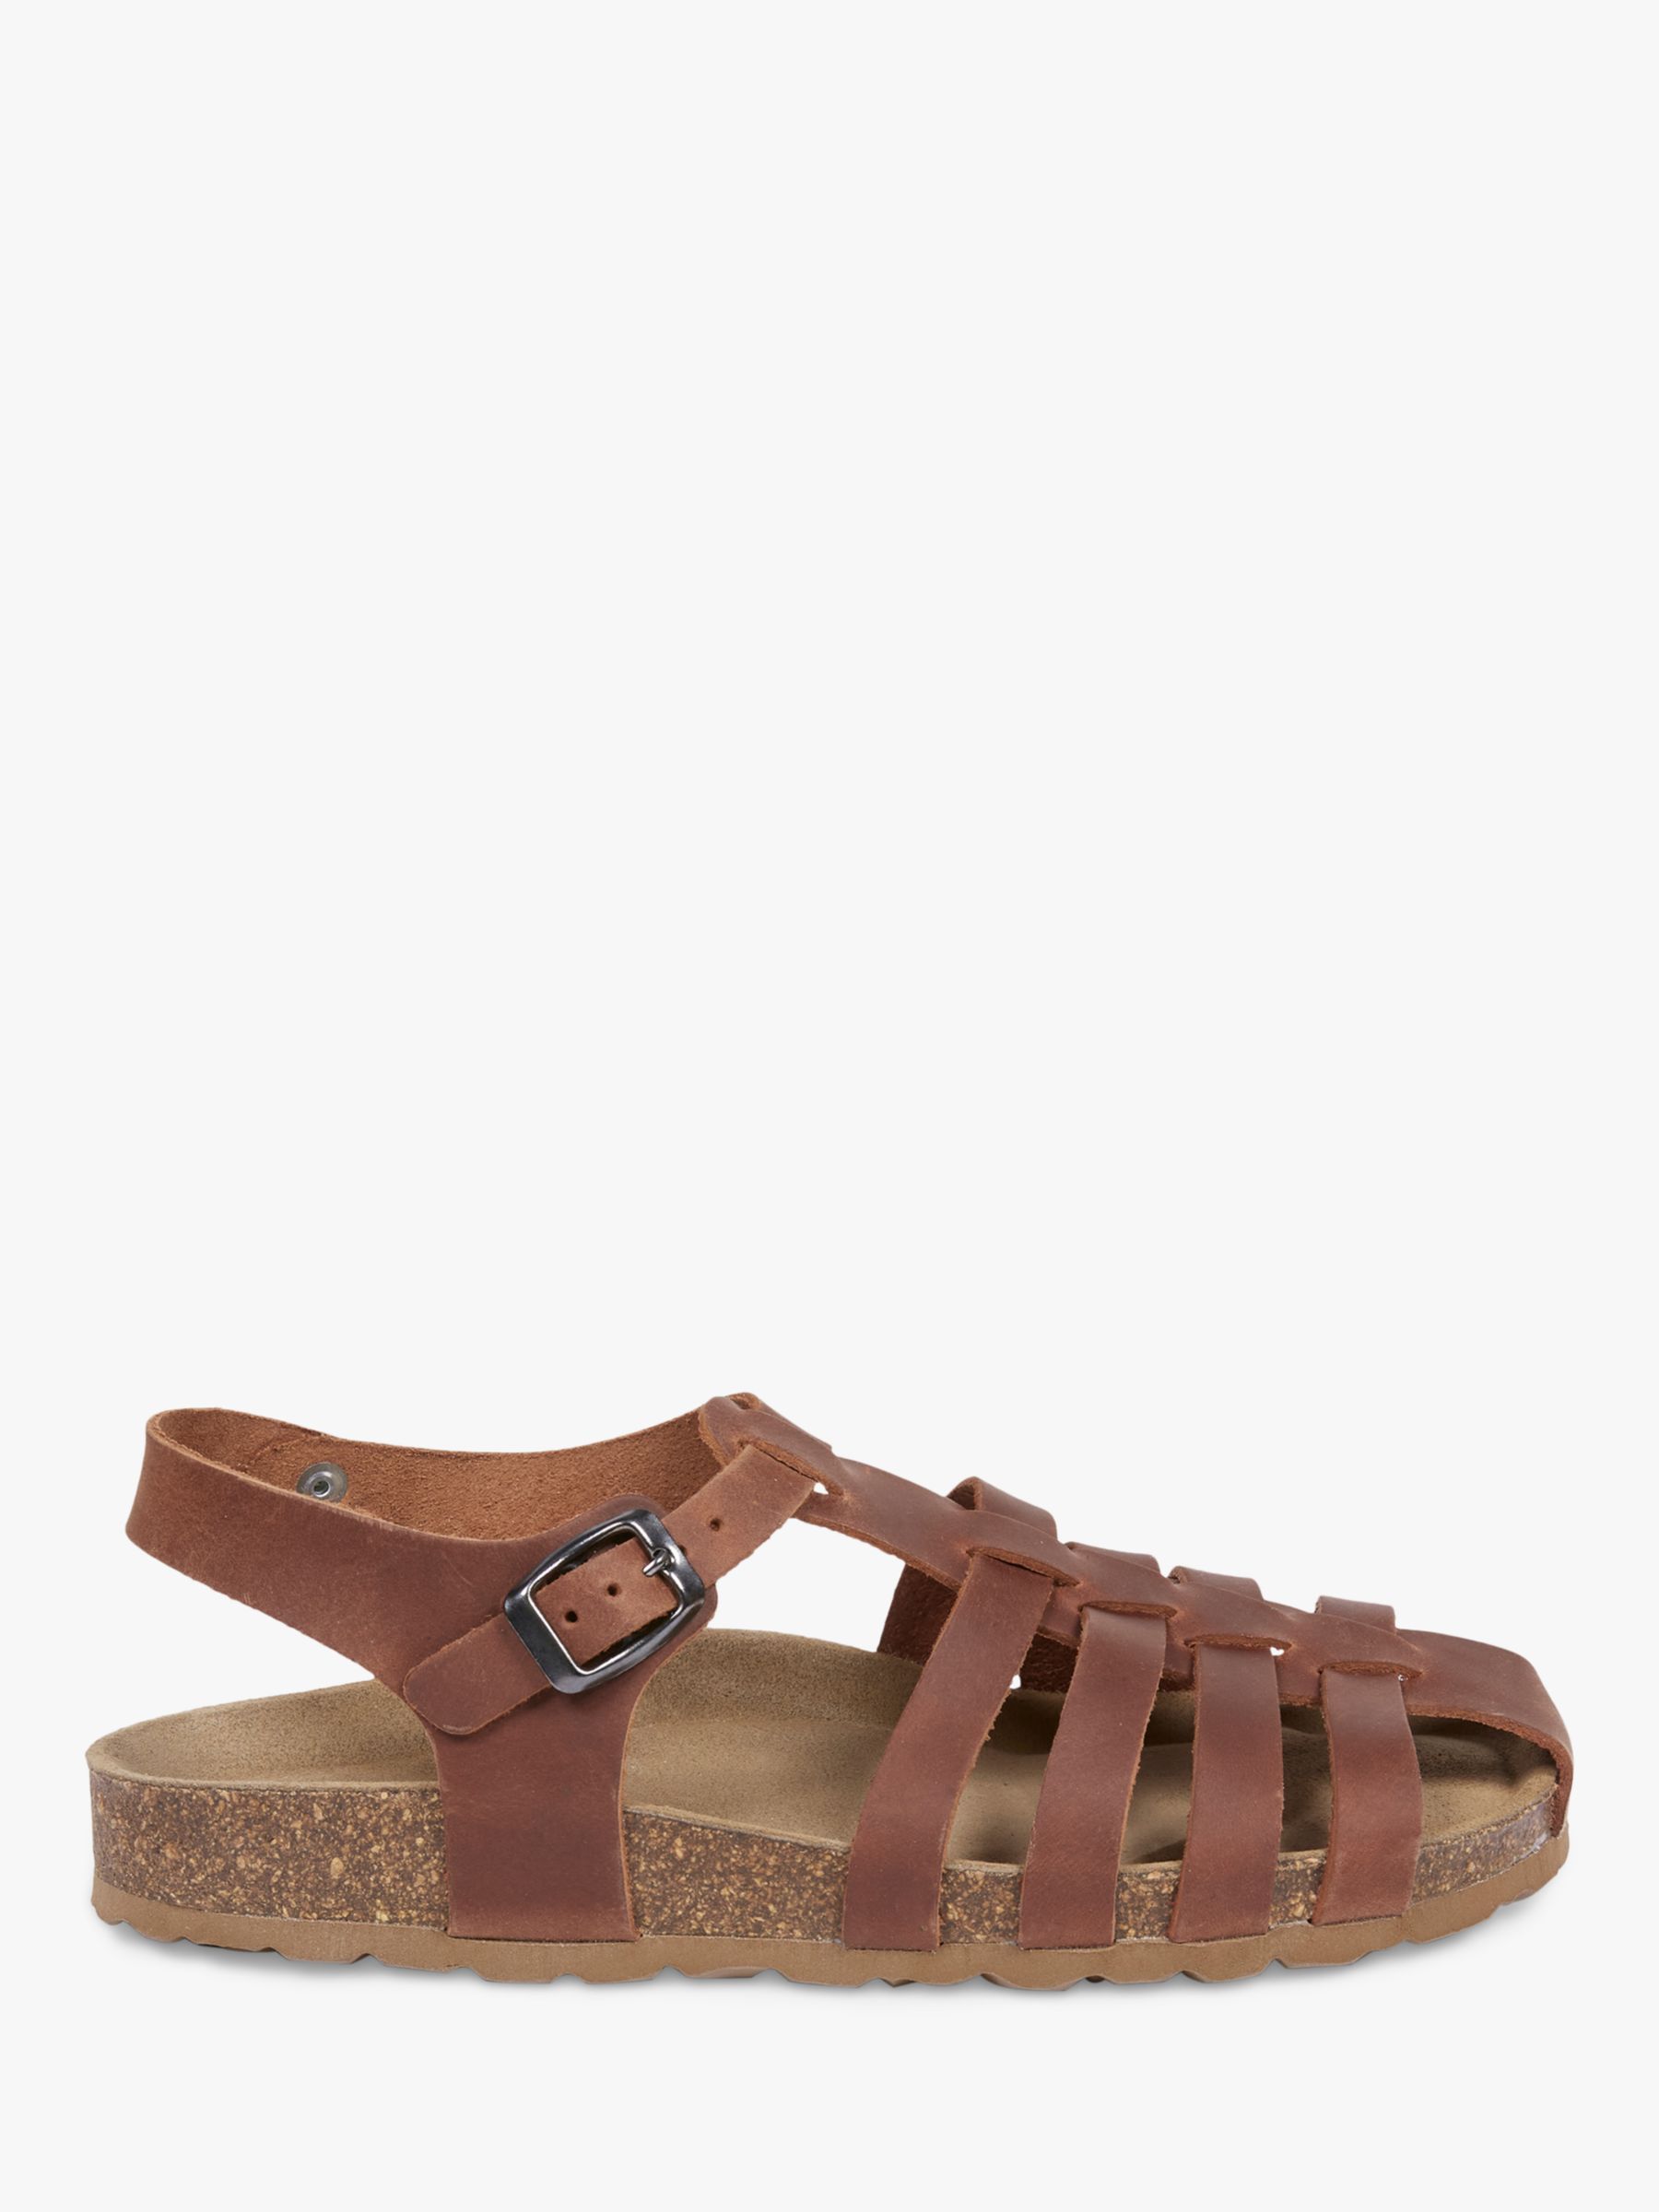 Celtic & Co. Leather Fisherman Sandals, Rust at John Lewis & Partners